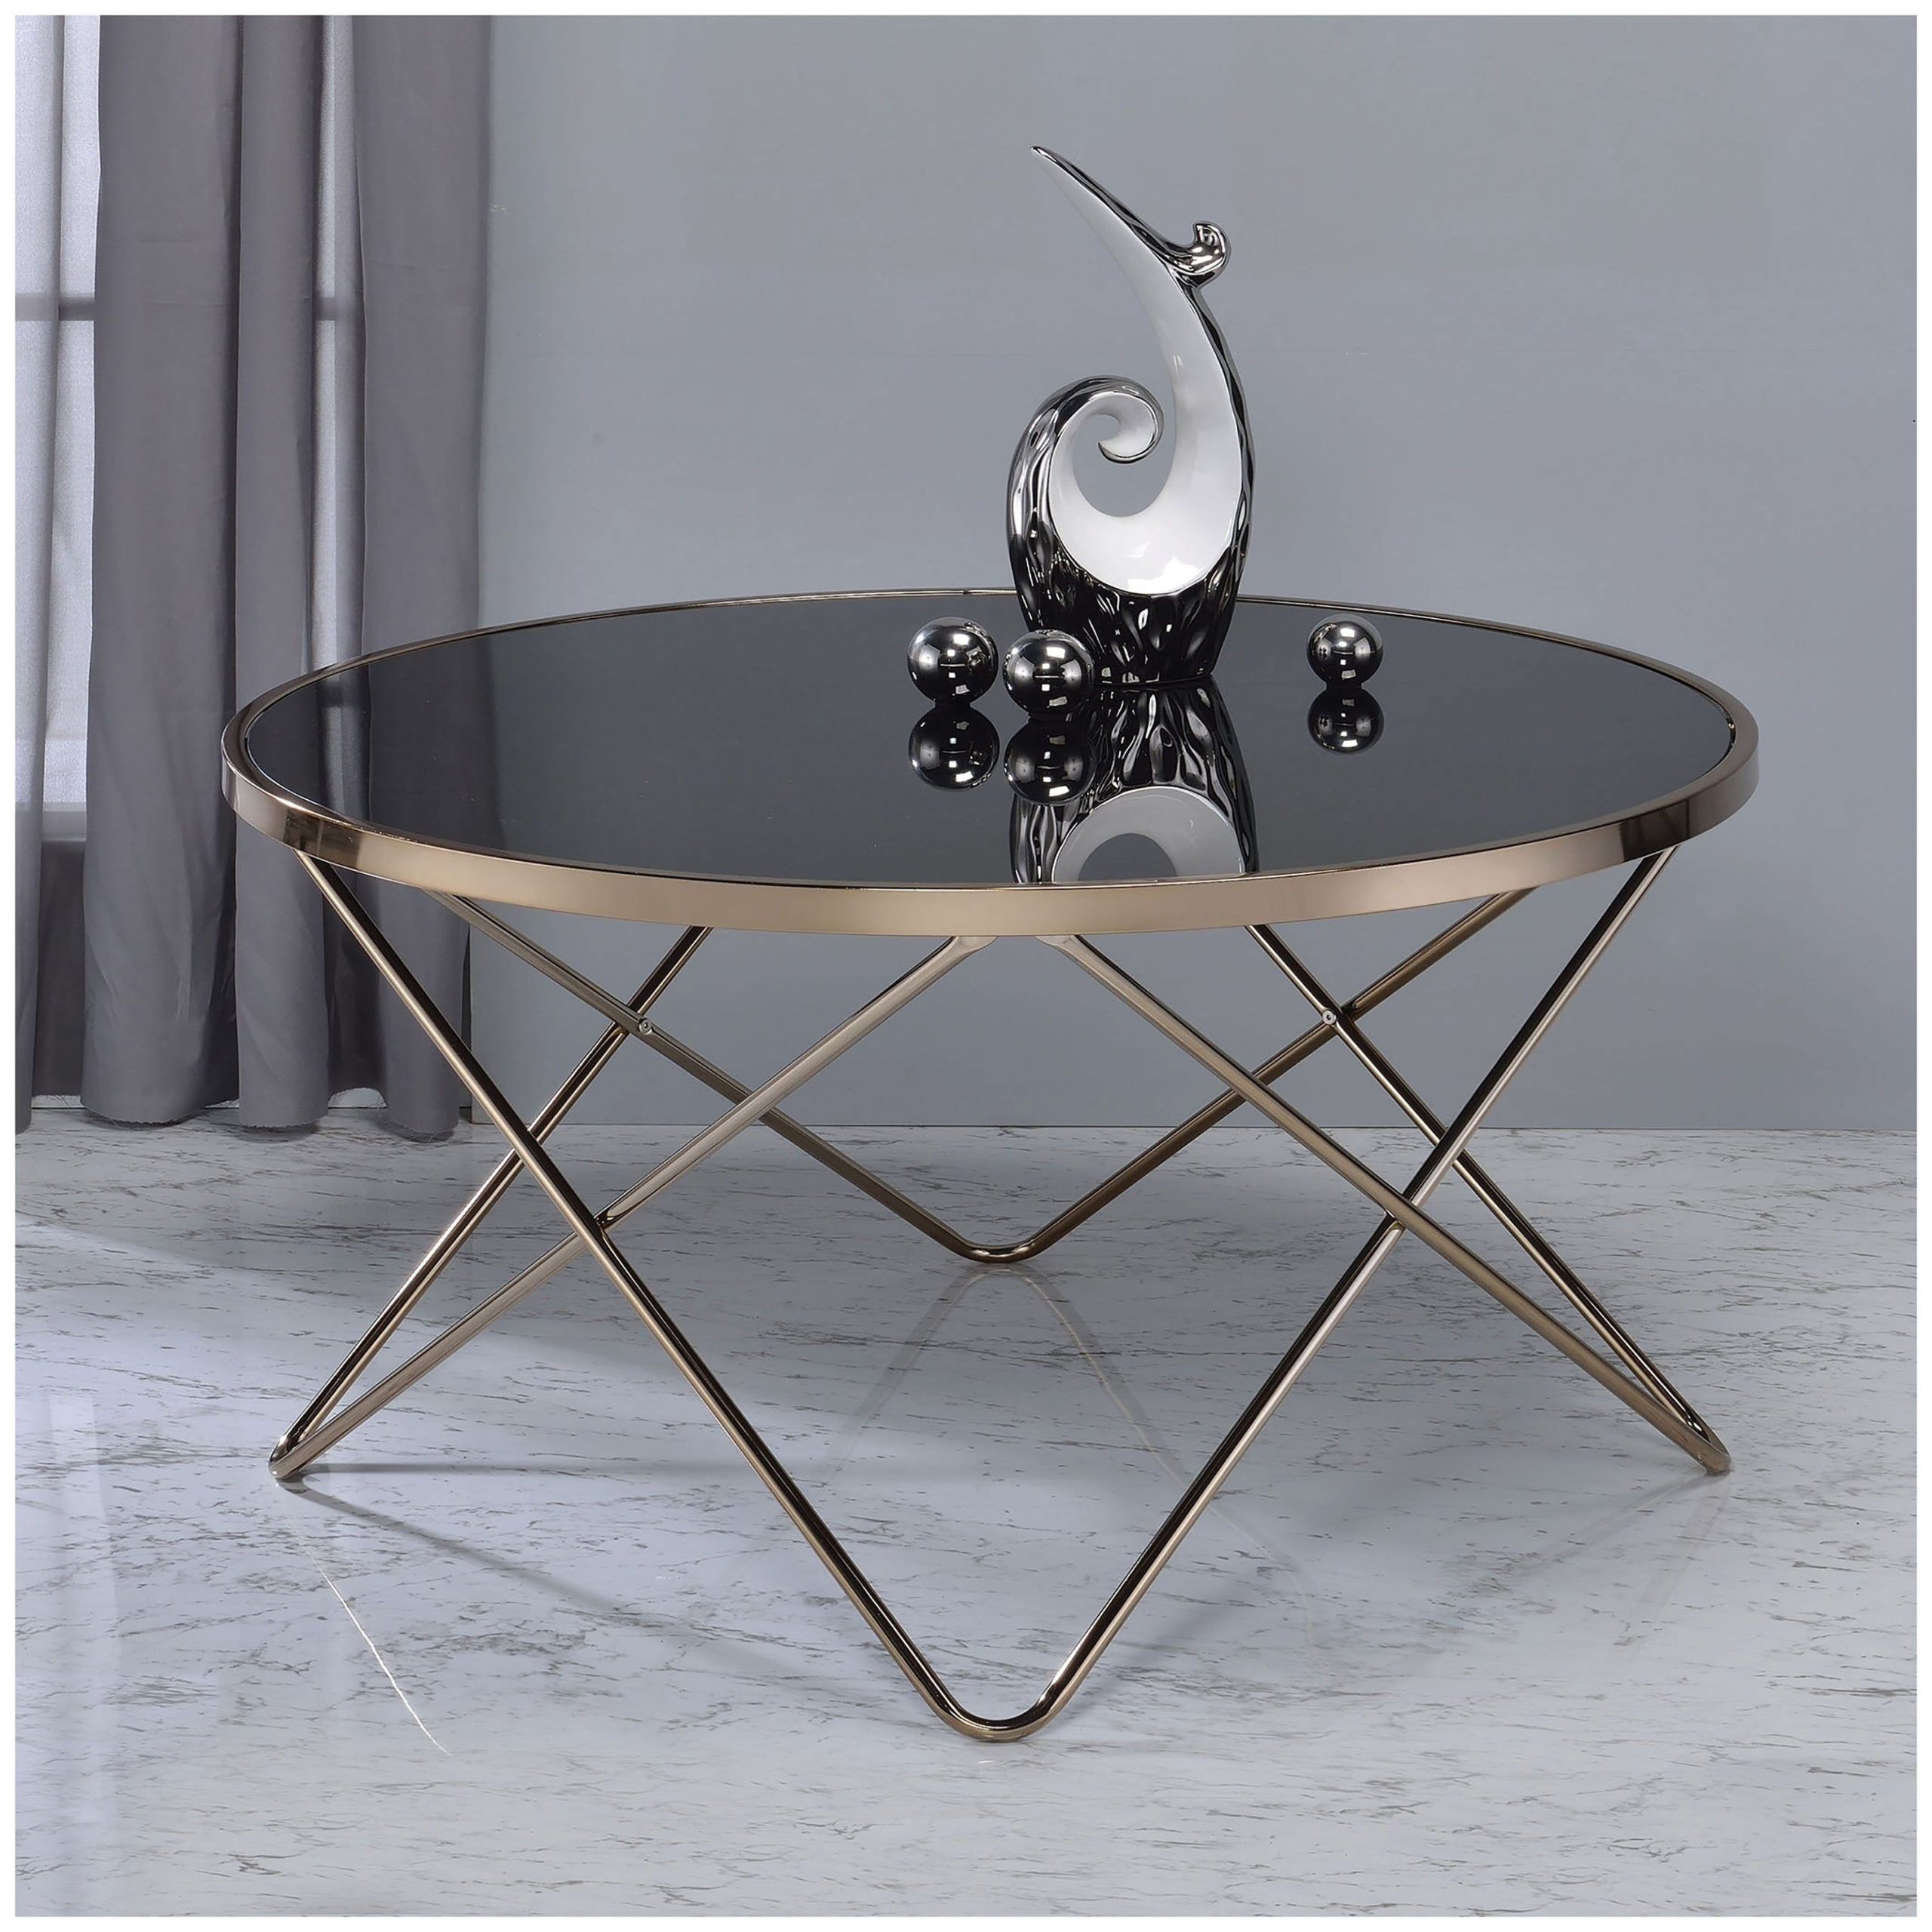 Urban Designs V Shaped Metal Frame Round Coffee Table – Black Glass Intended For Round Coffee Tables With Steel Frames (Gallery 2 of 21)